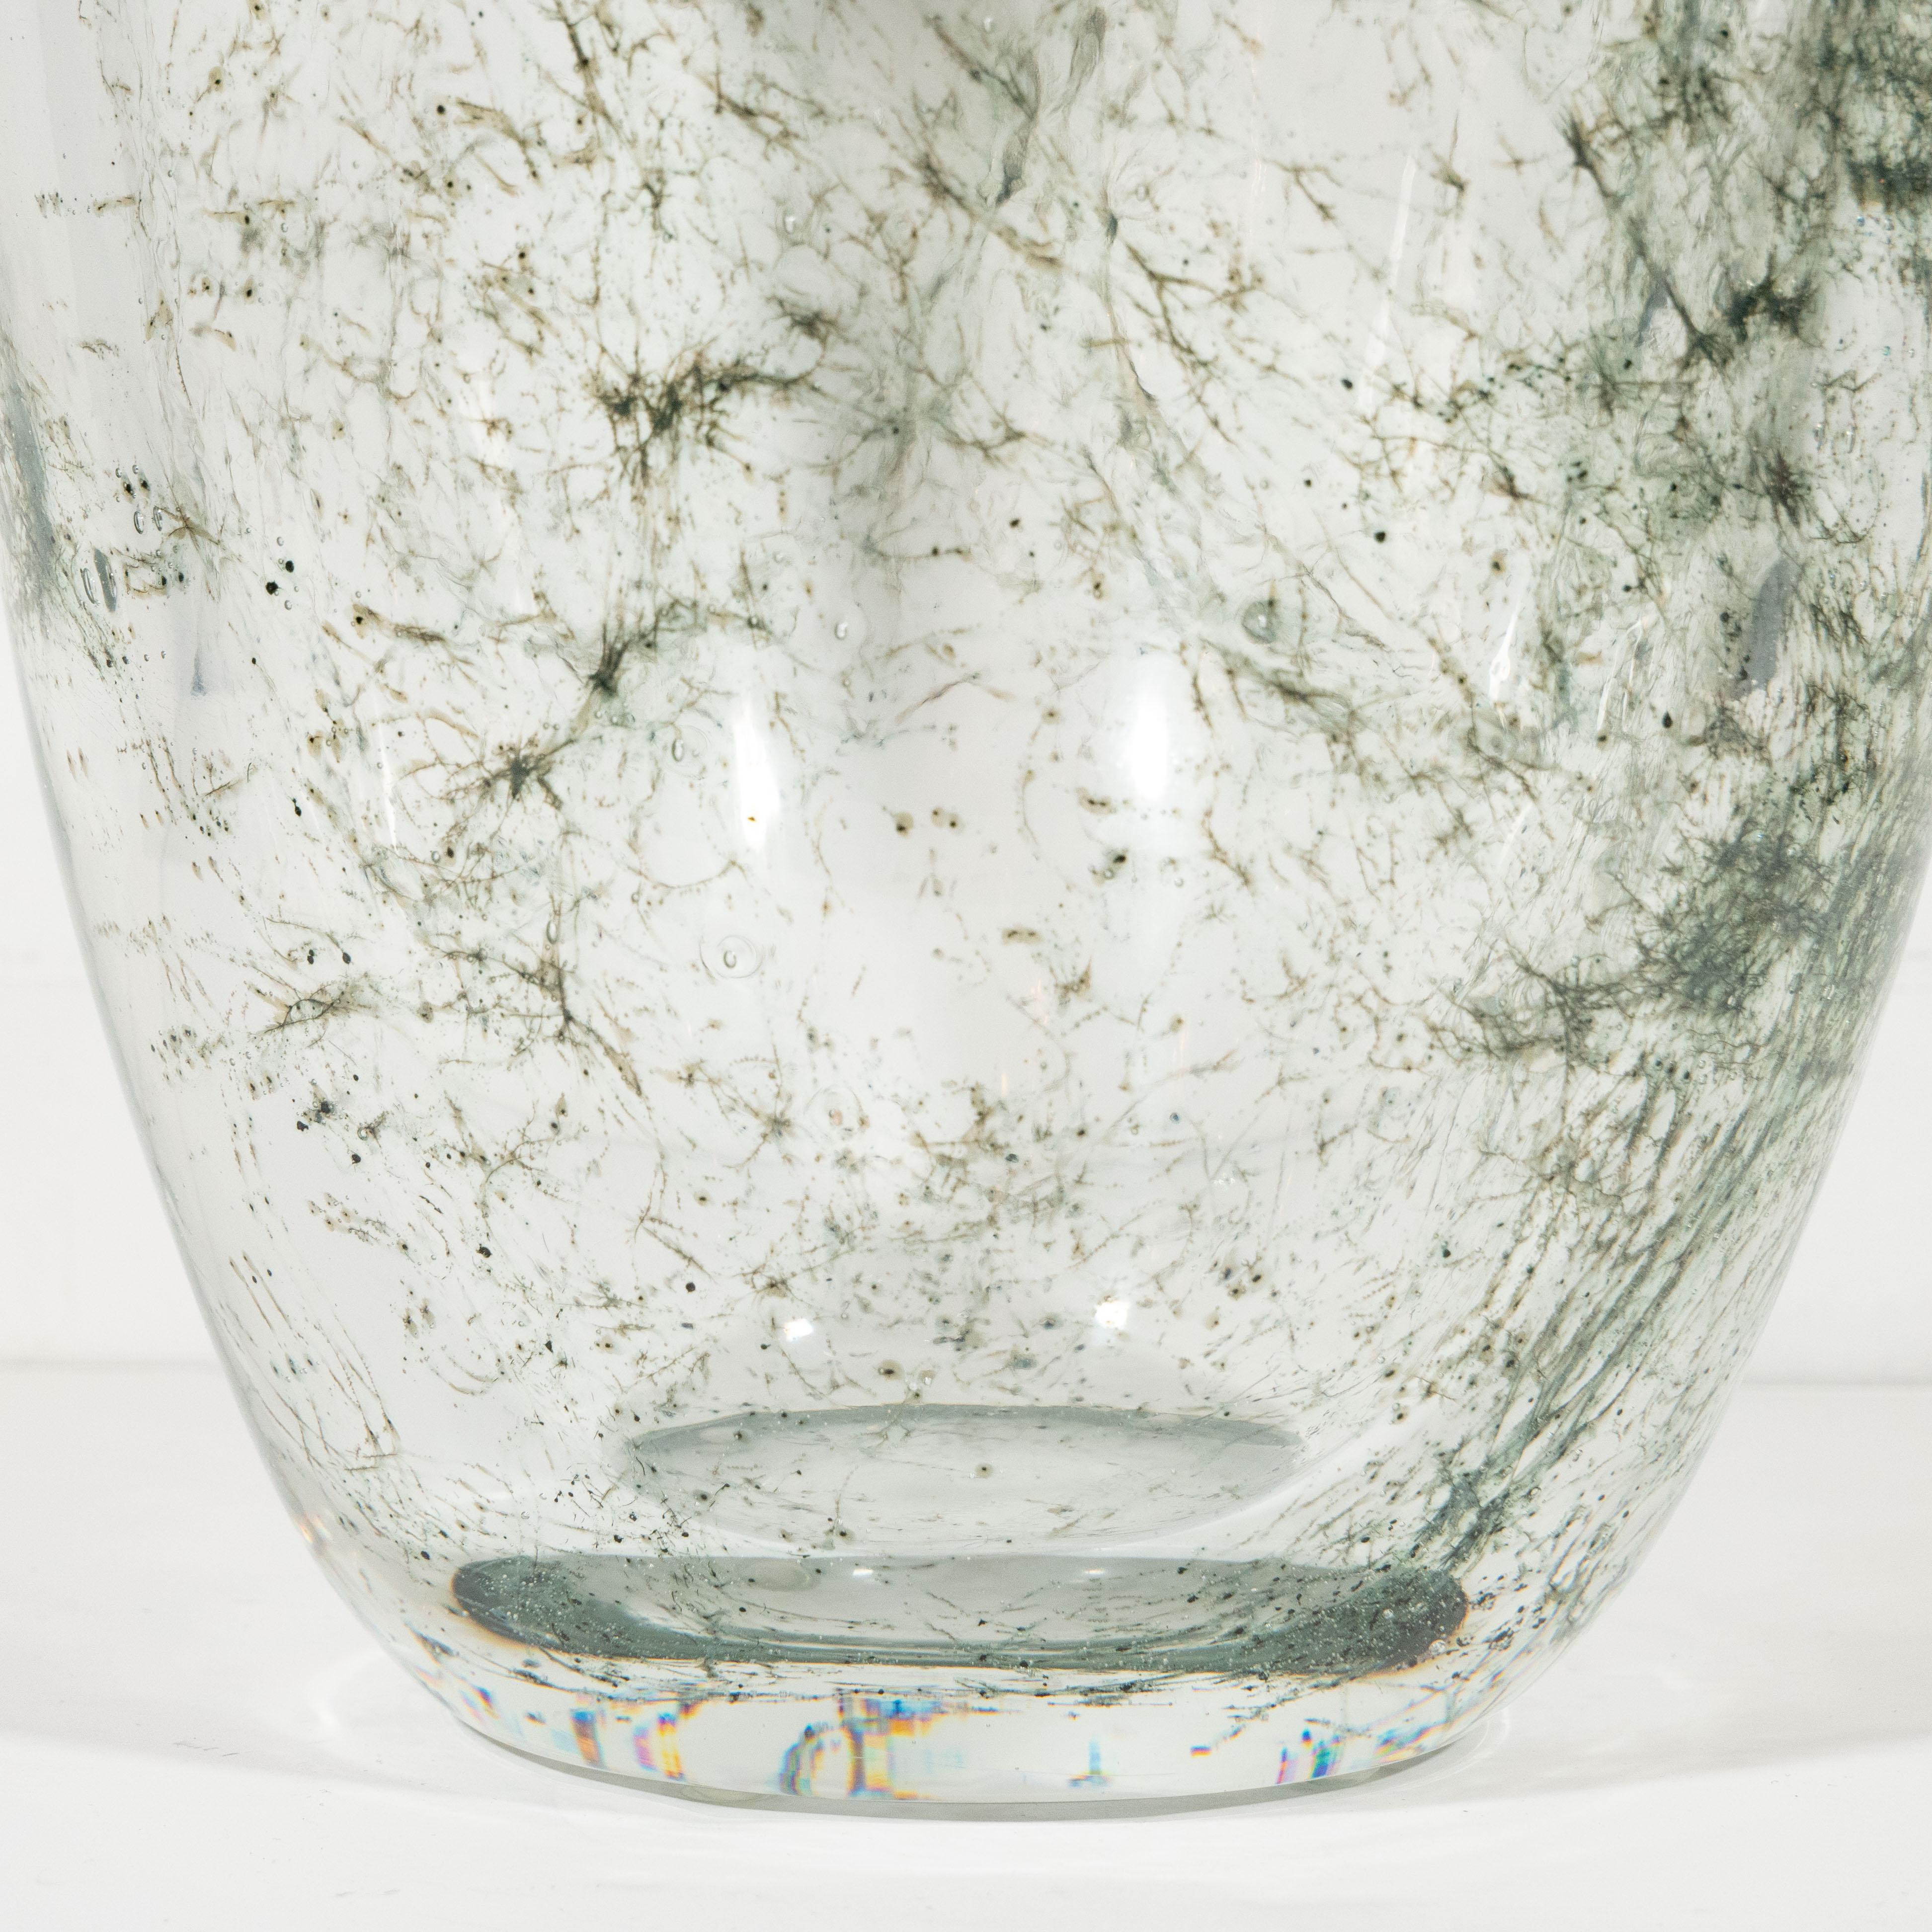 This sophisticated glass vase was handblown in Murano Italy- the island off the coast of Venice renowned for centuries for its superlative glass production. It features a translucent conical body with an abundance of web-like constellations of